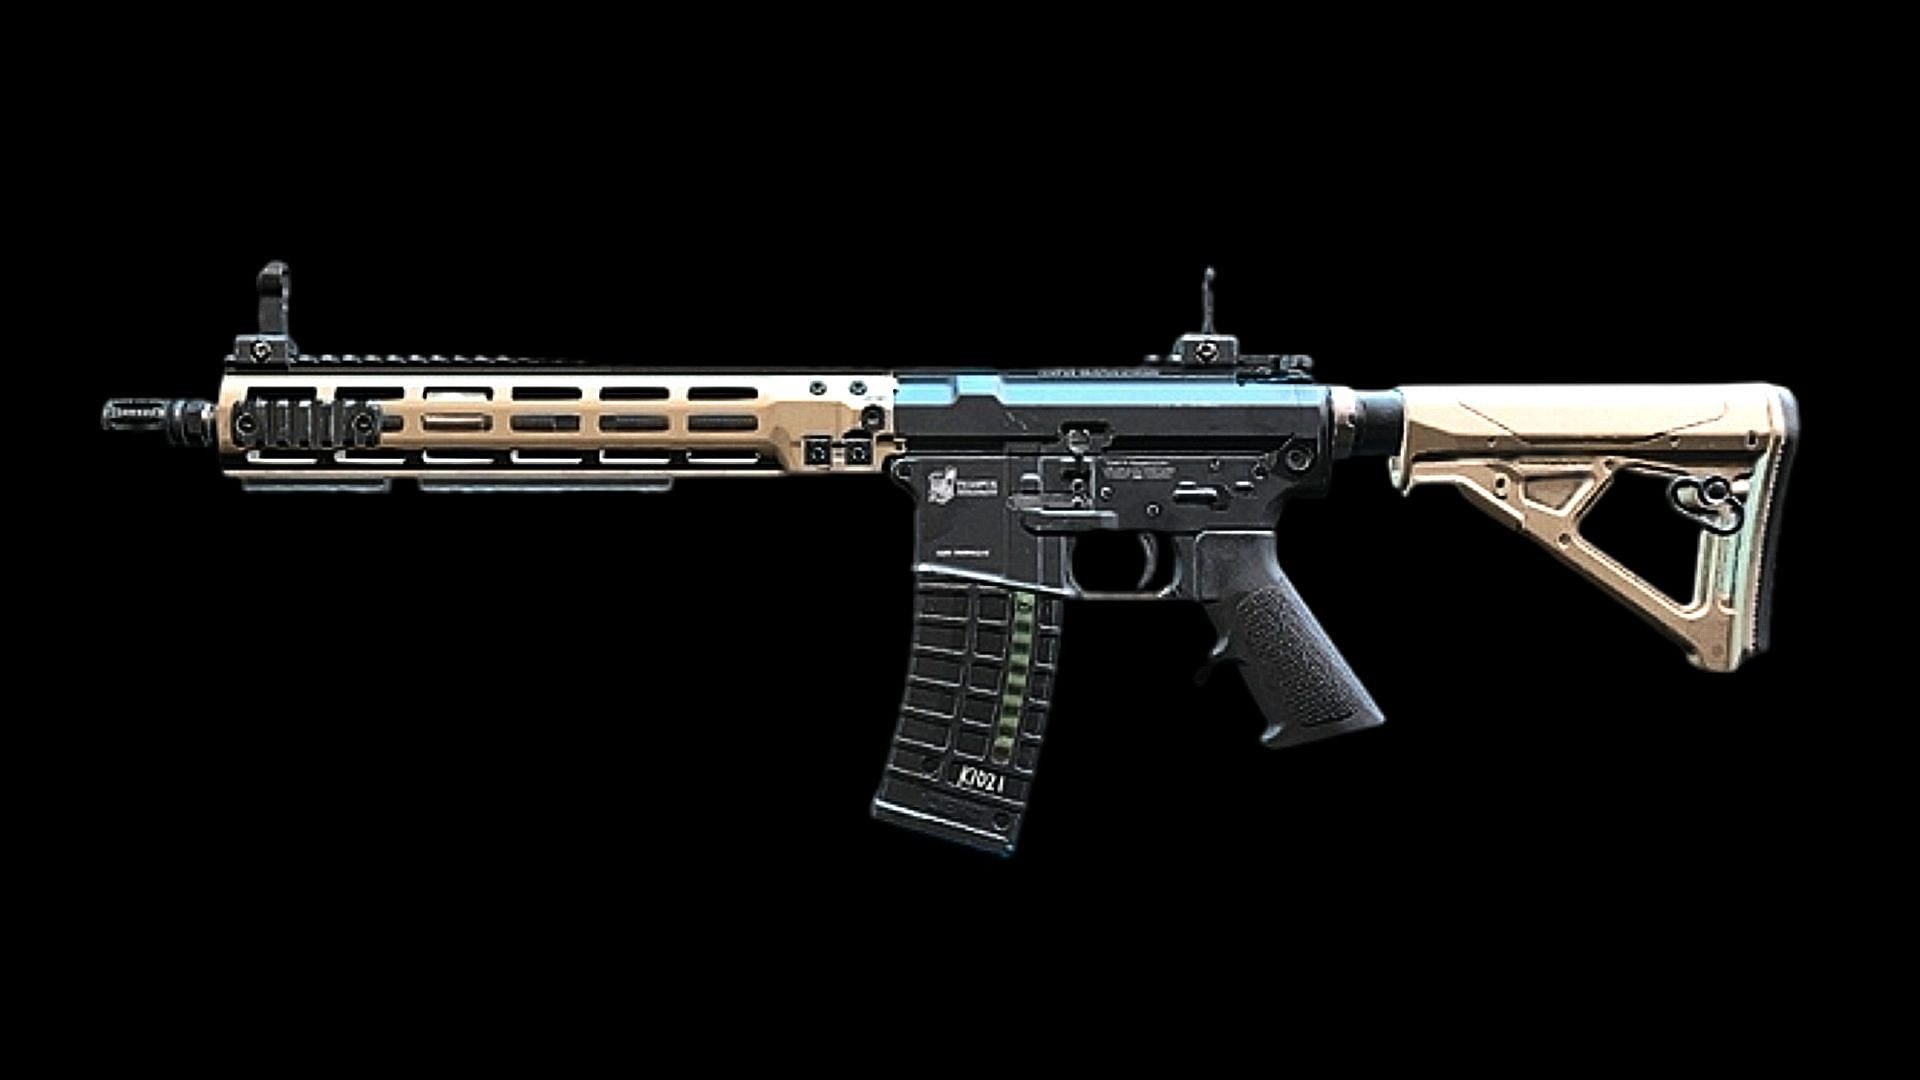 The M4 assault rifle in Modern Warfare 2 (Image via Activision)